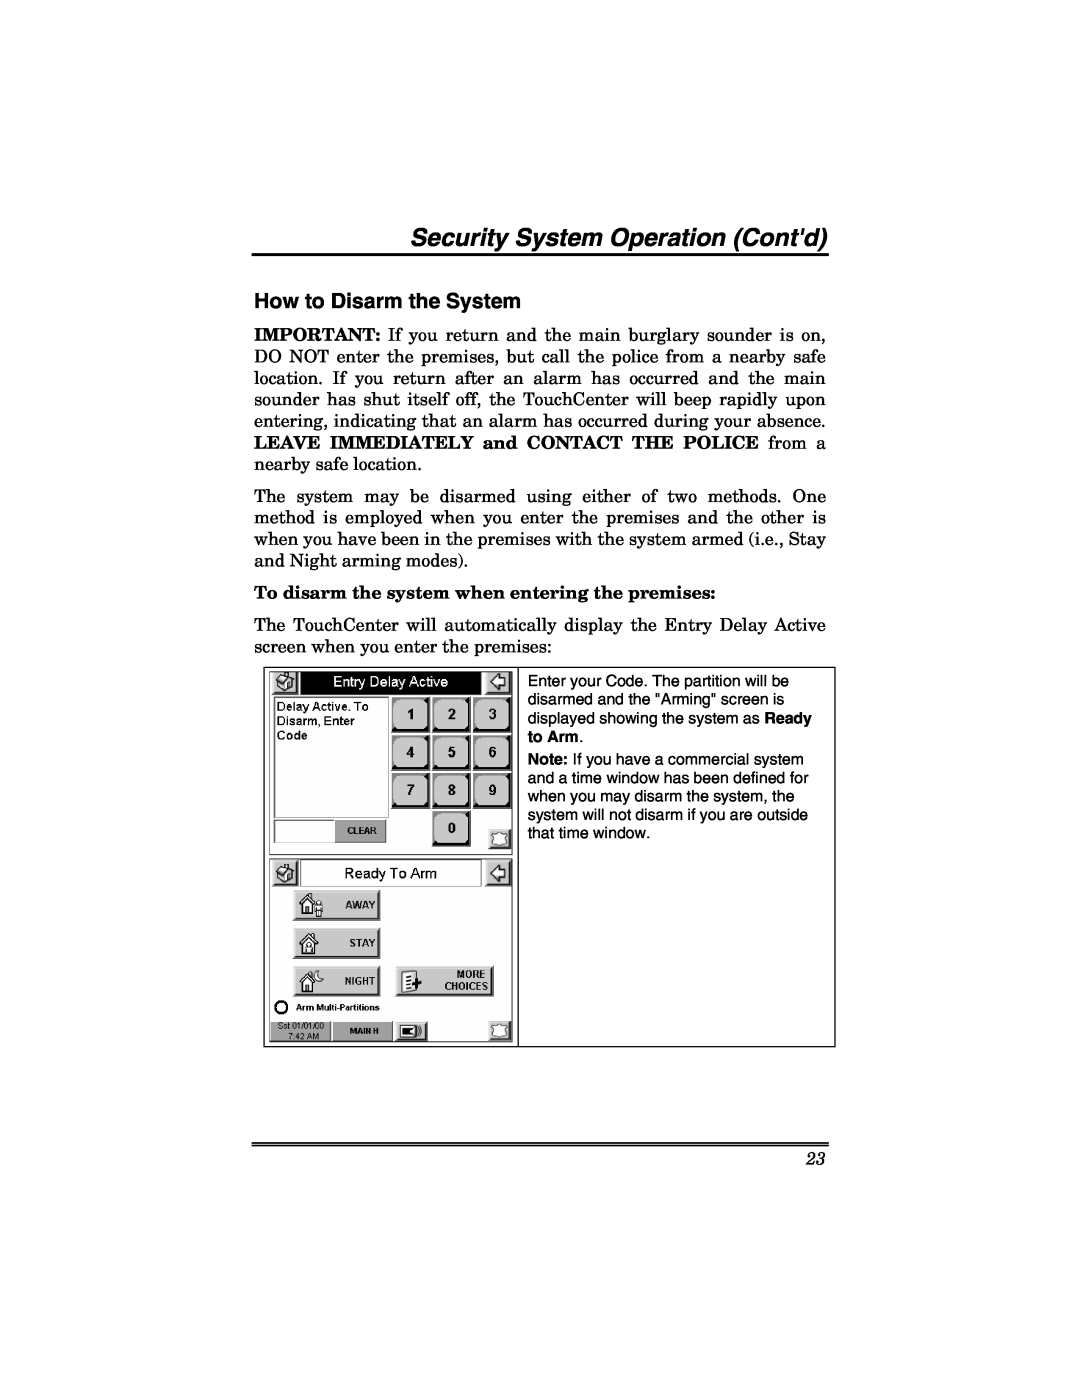 Honeywell 6271V How to Disarm the System, To disarm the system when entering the premises, Security System Operation Contd 